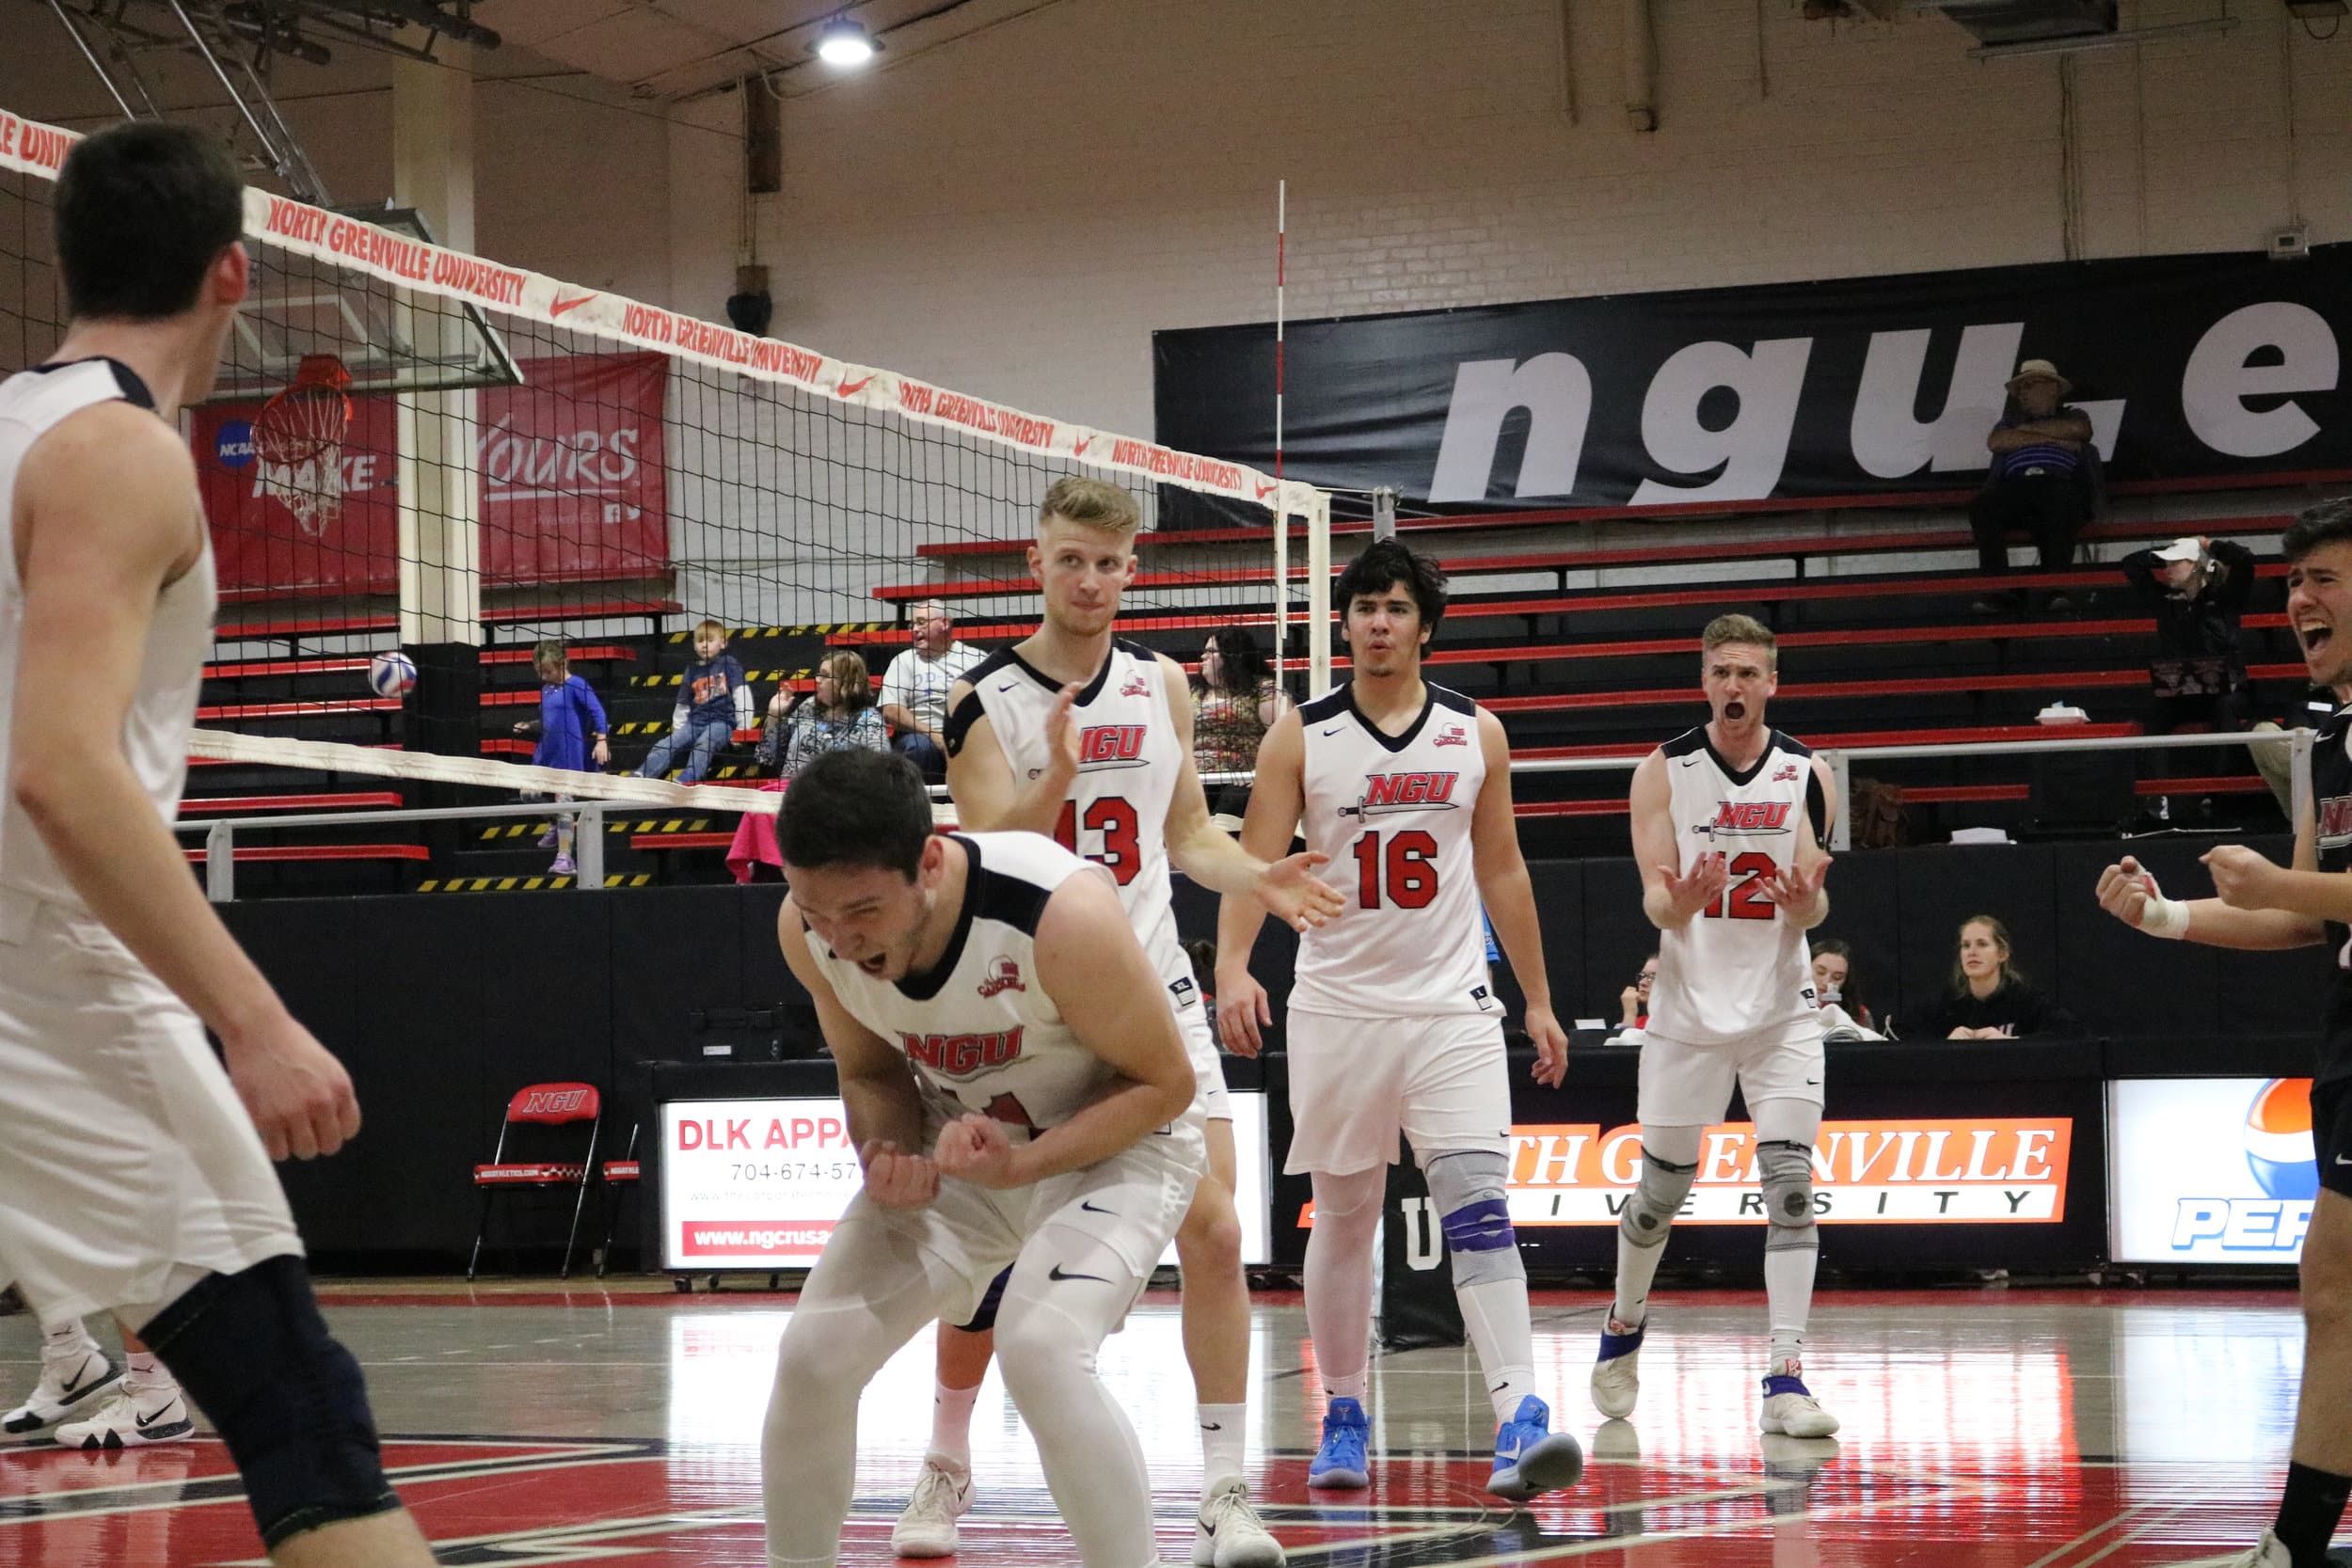 Rojba (1), Gilbert (7), McGee (11), Senior Aaron Campbell (12), Junior Ben Hamsho (13), and Carrillo (16) celebrate after scoring a point at the beginning of the third set.